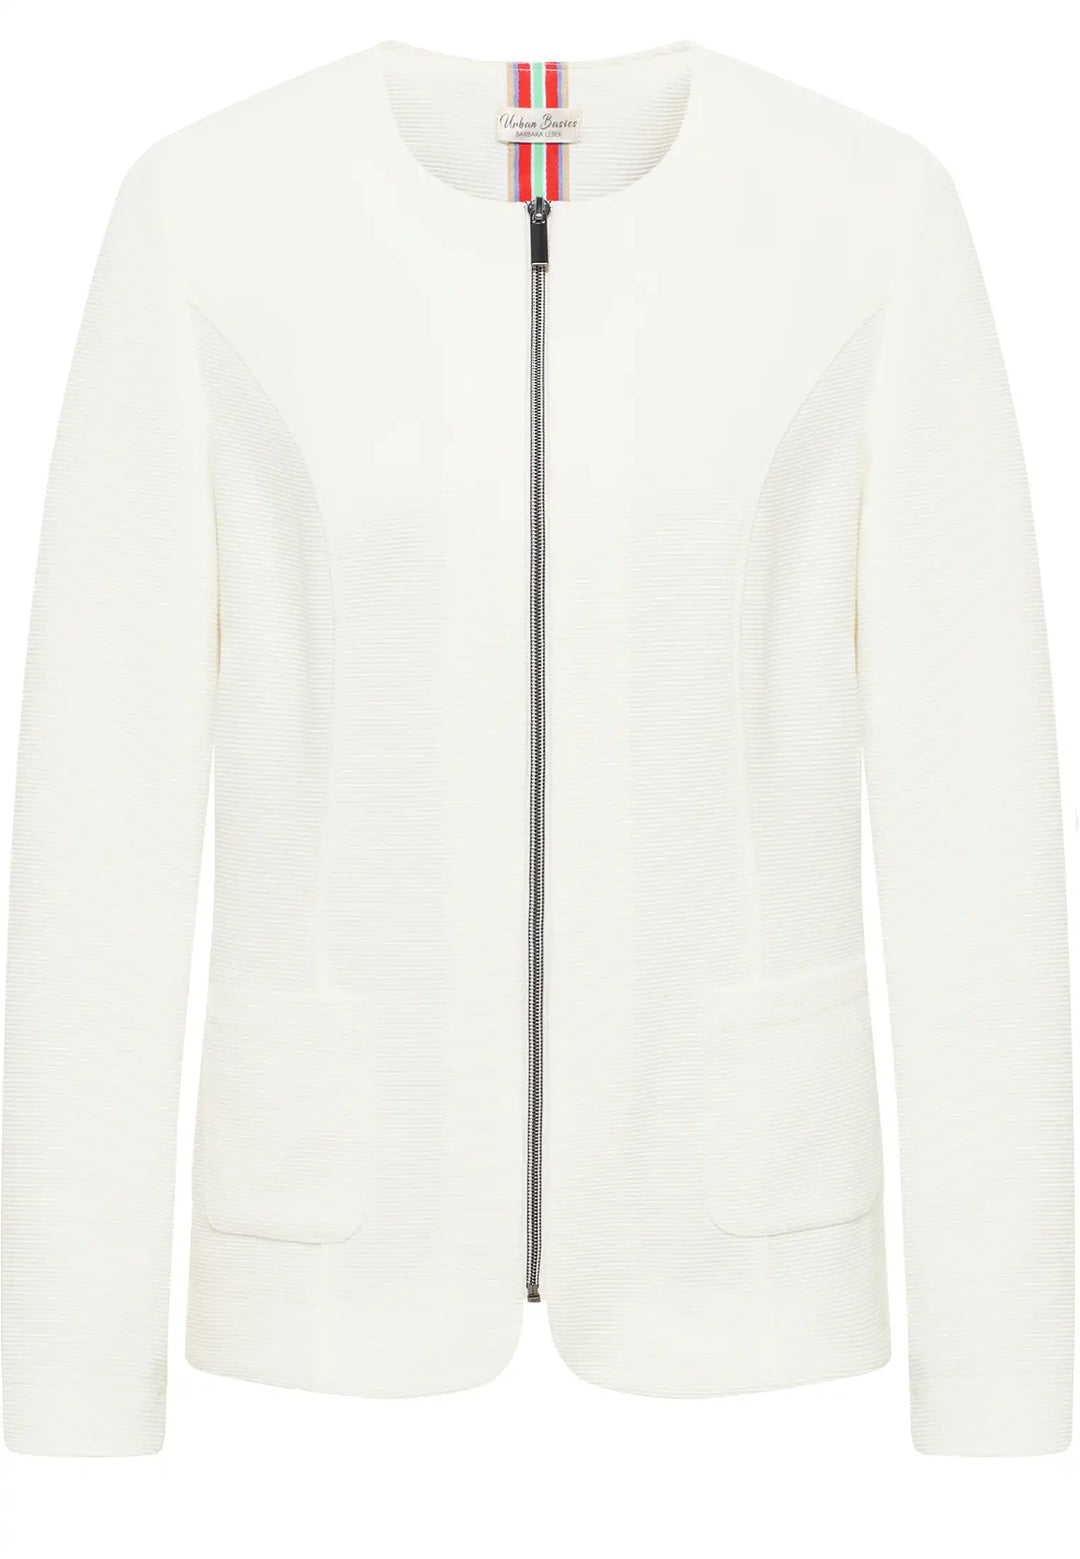 Ivory ribbed jacket with round neckline, front zip closure, and pockets, style 65170042-120